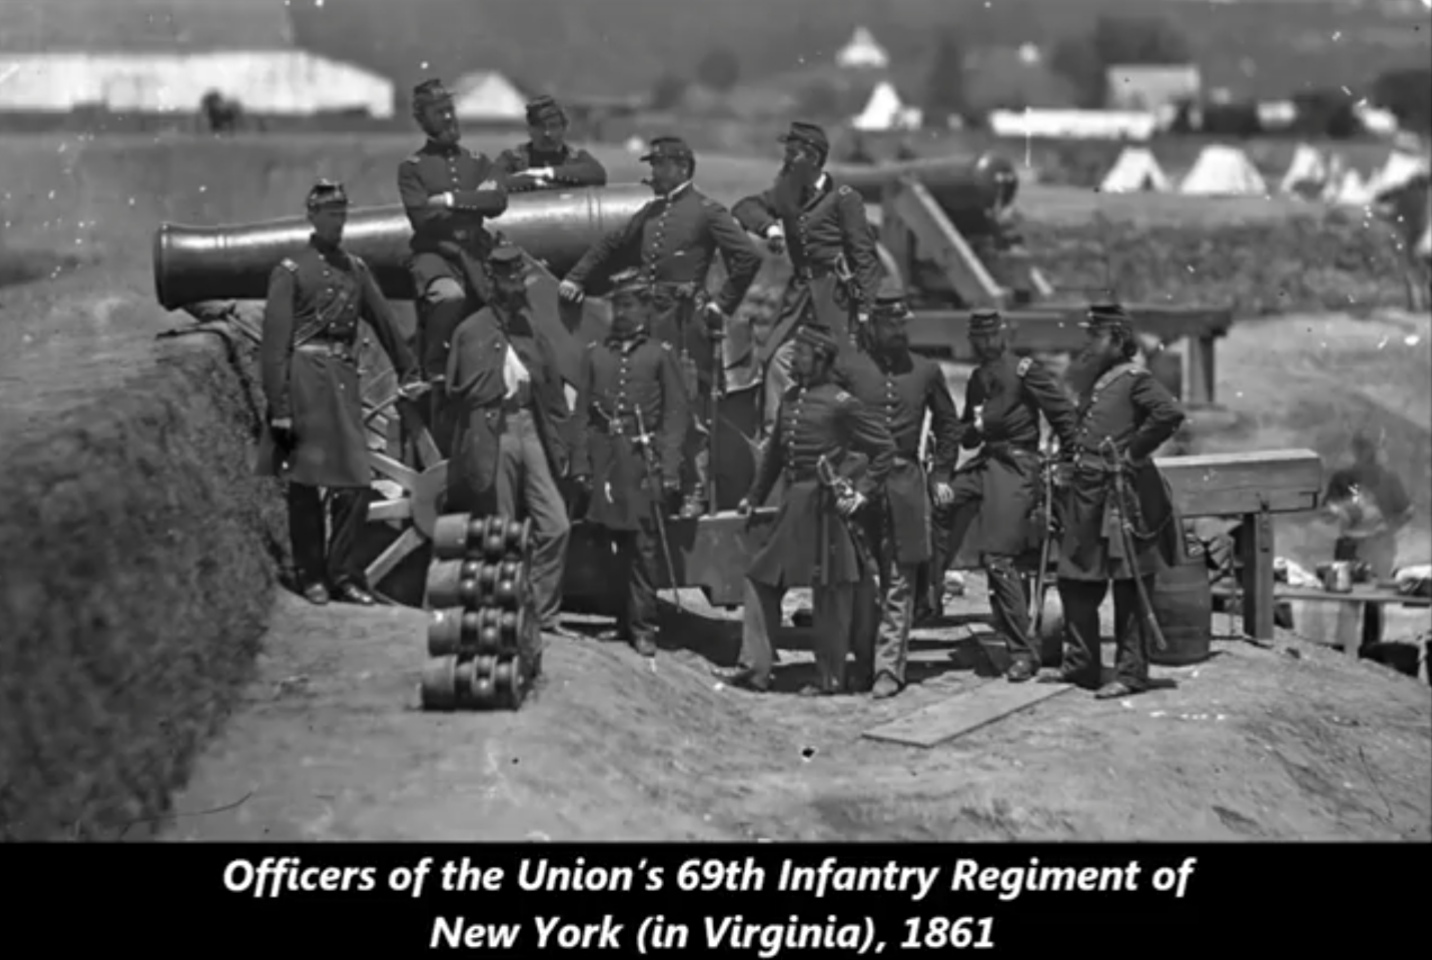 us civil war - Officers of the Union's 69th Infantry Regiment of New York in Virginia, 1861